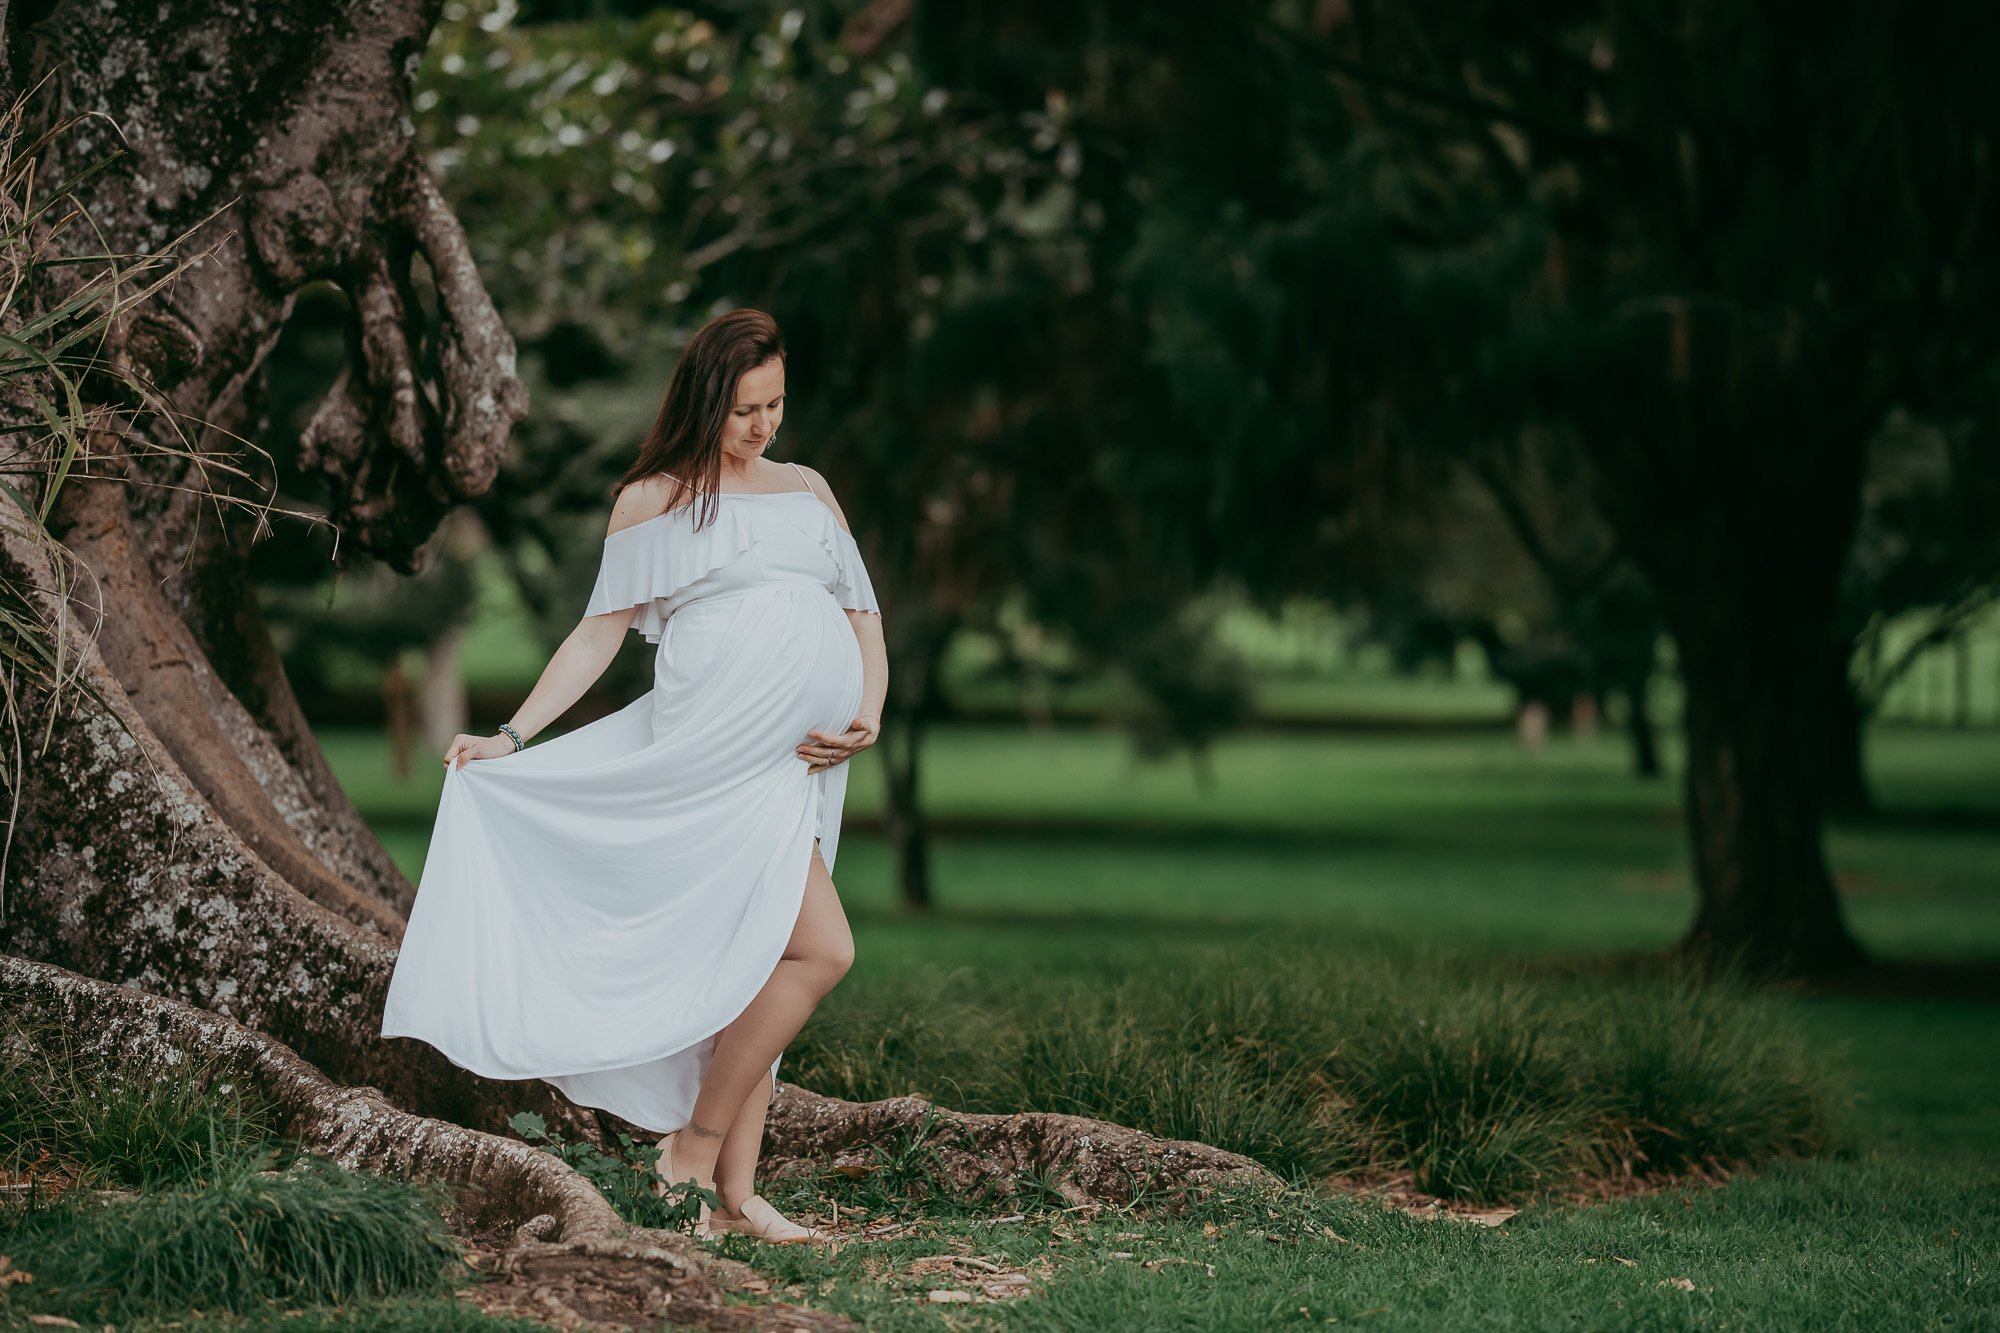 Blossom maternity session in Cornwall park {Auckland family-newborn photographer}